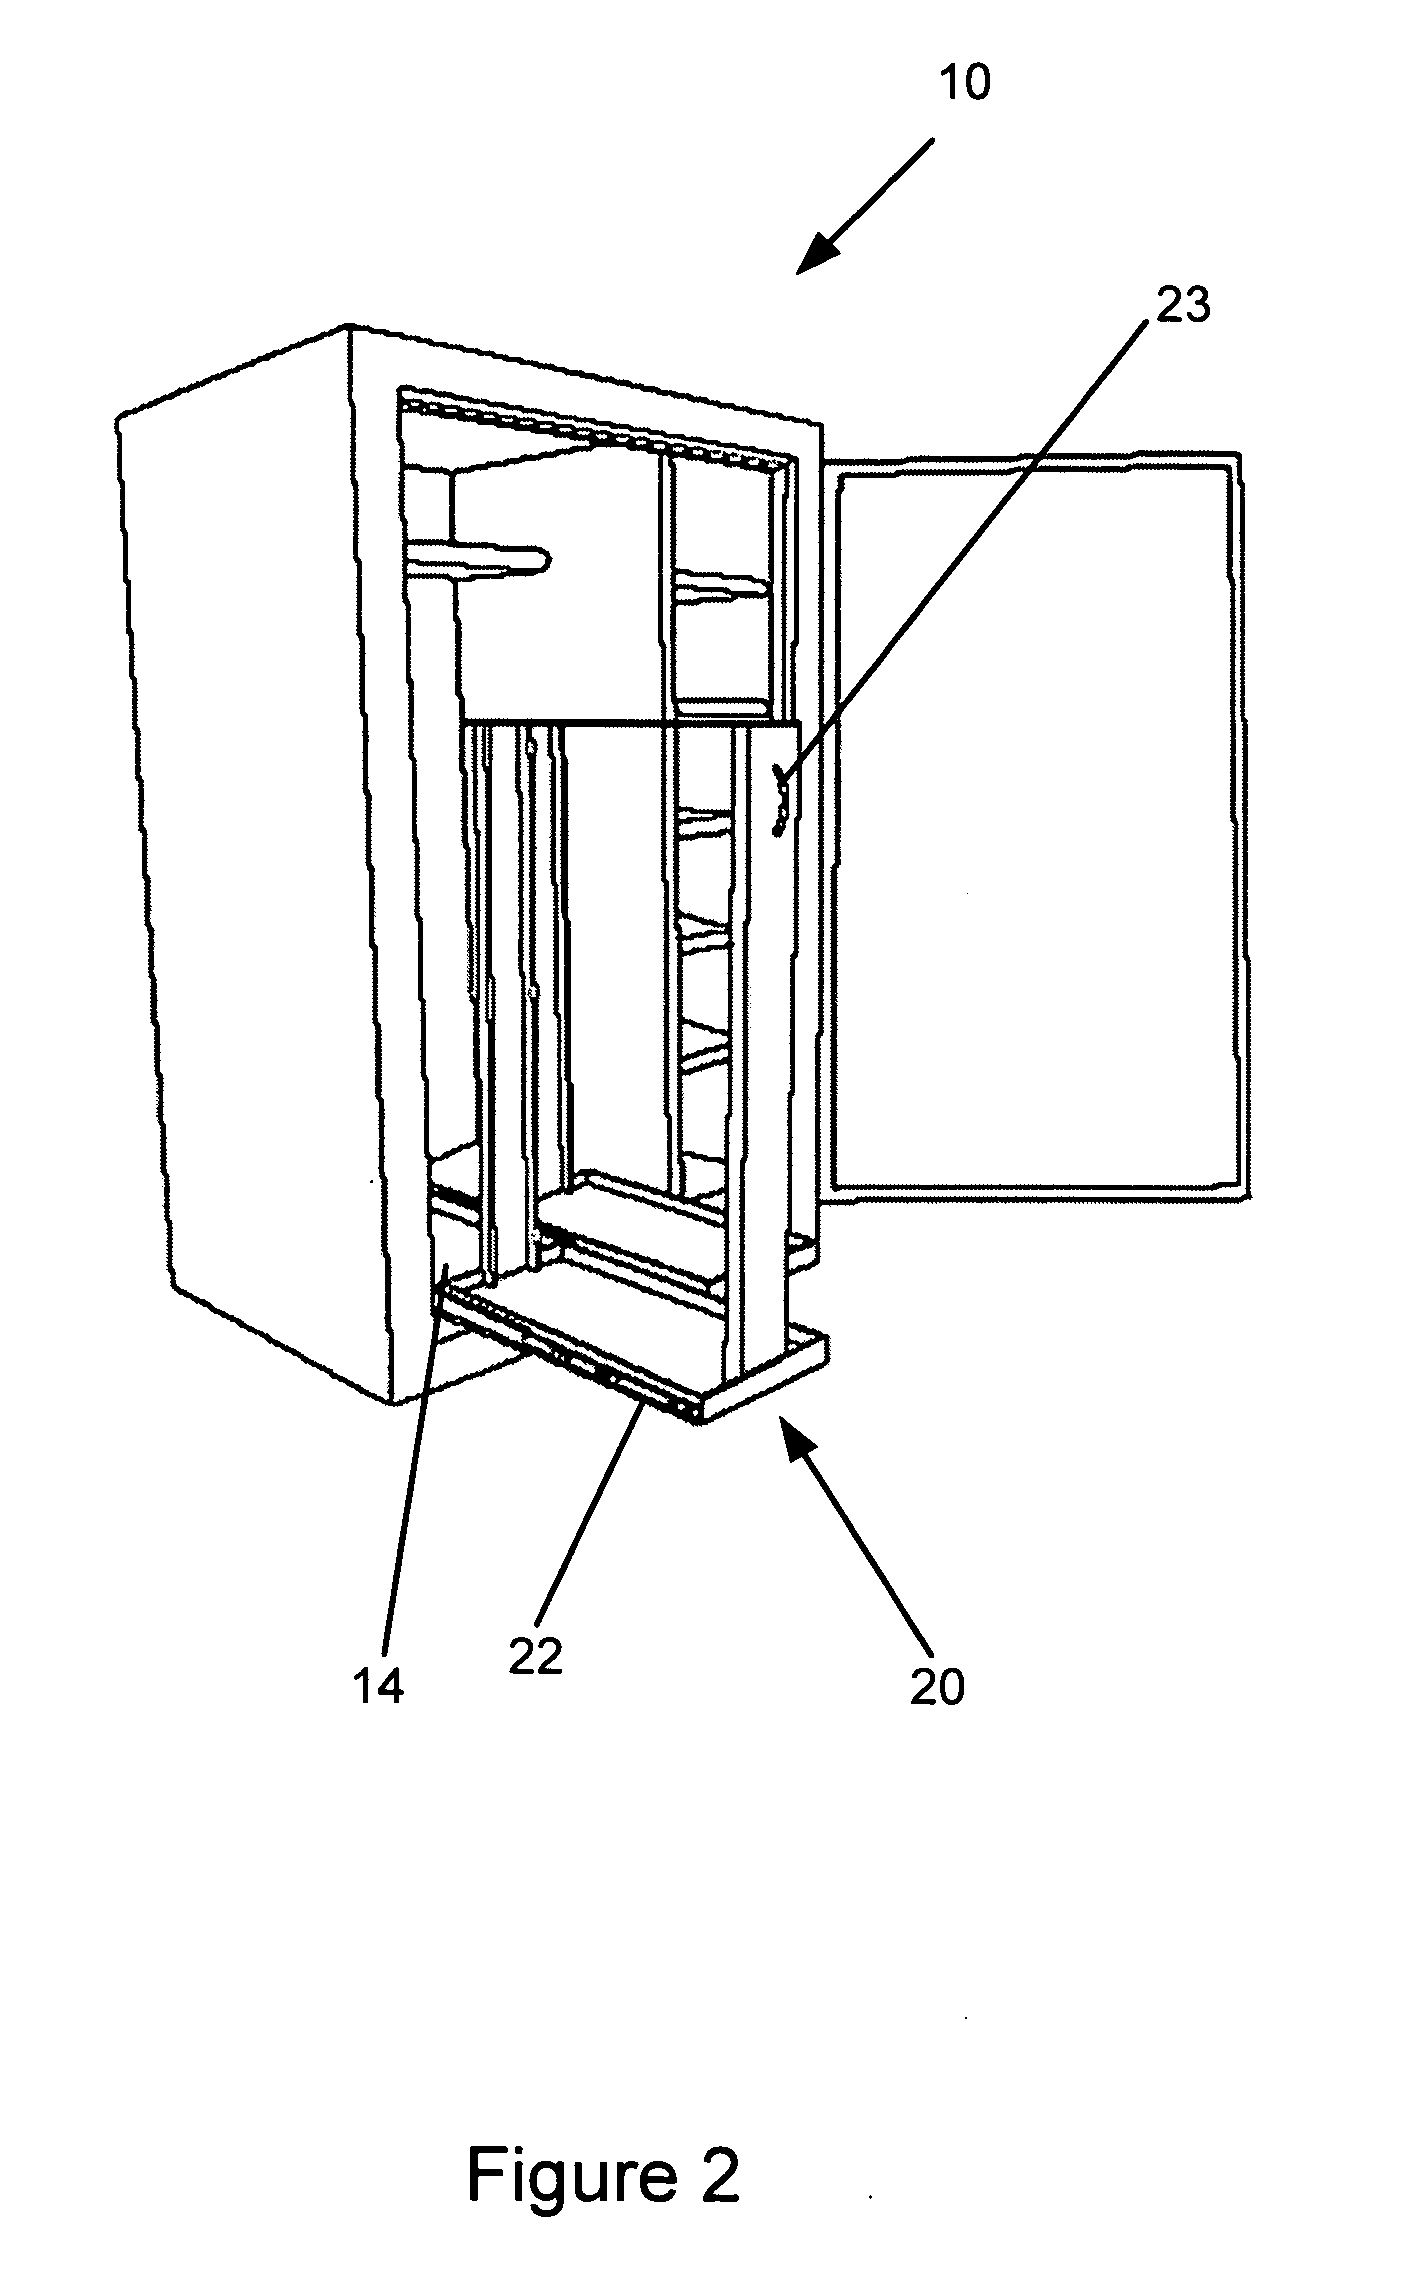 Pull-out gun racking system